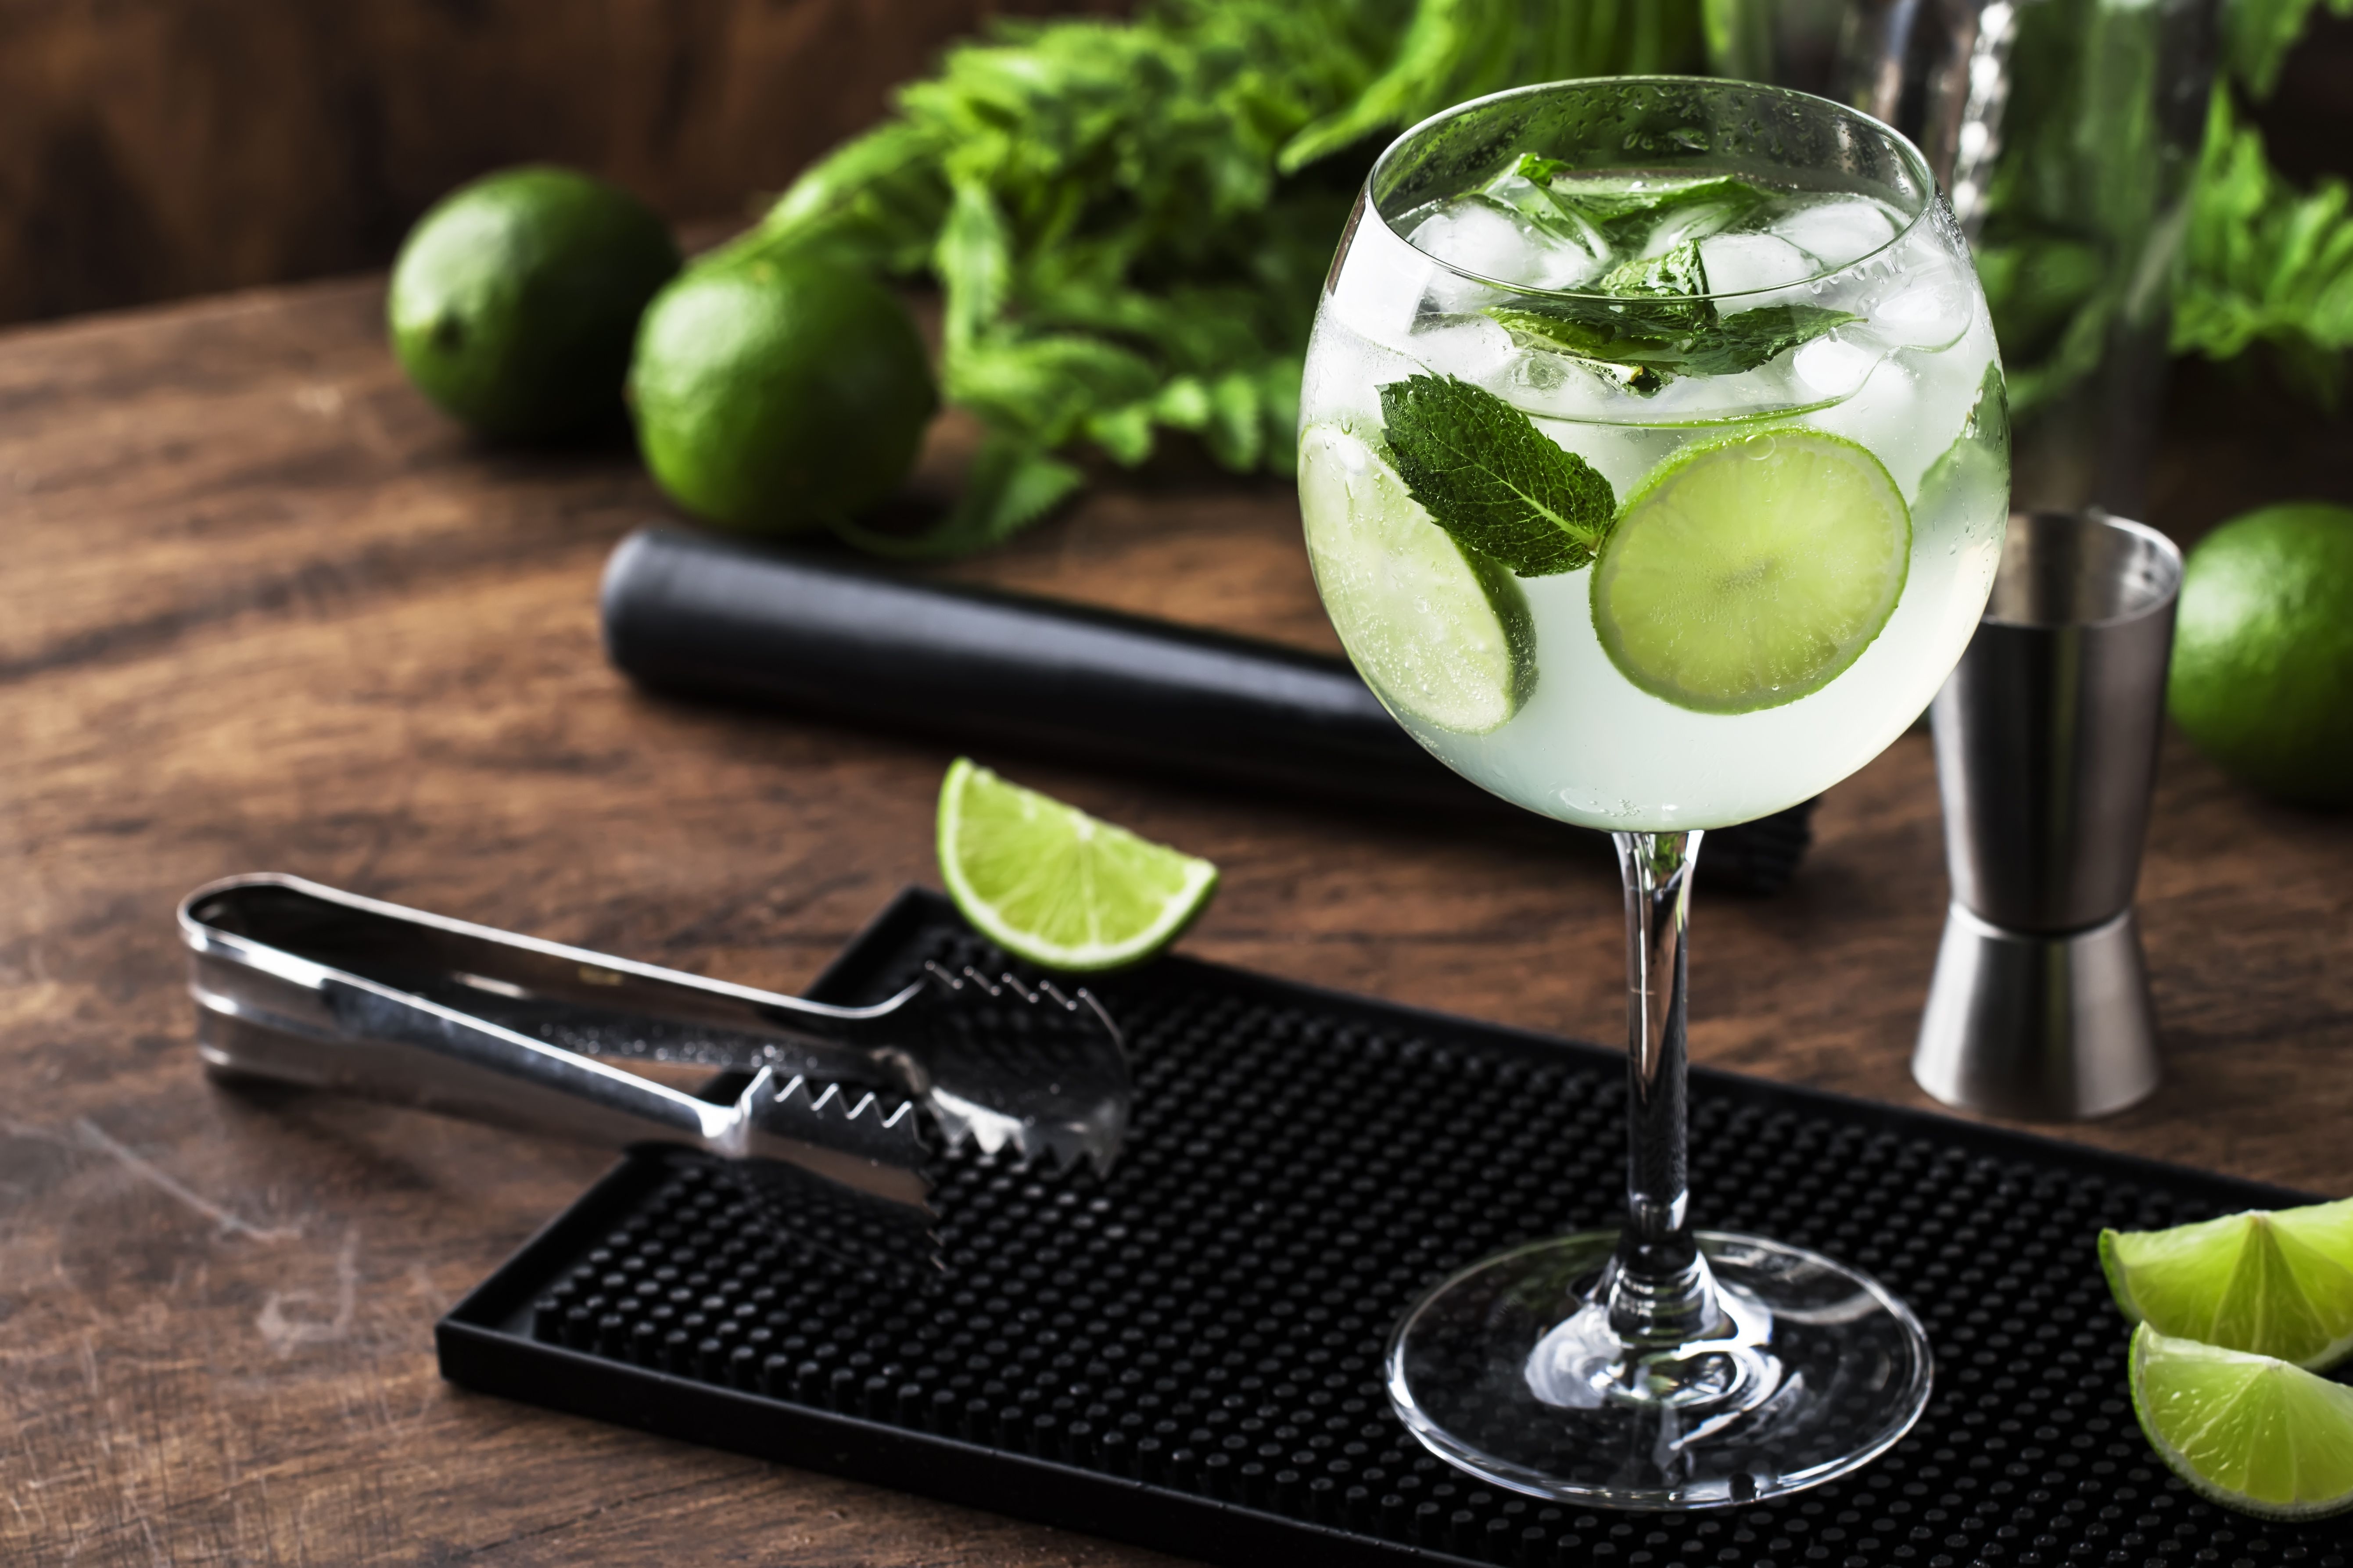 https://hips.hearstapps.com/hmg-prod/images/royal-mojito-alcoholic-cocktail-with-white-rum-royalty-free-image-1581938500.jpg